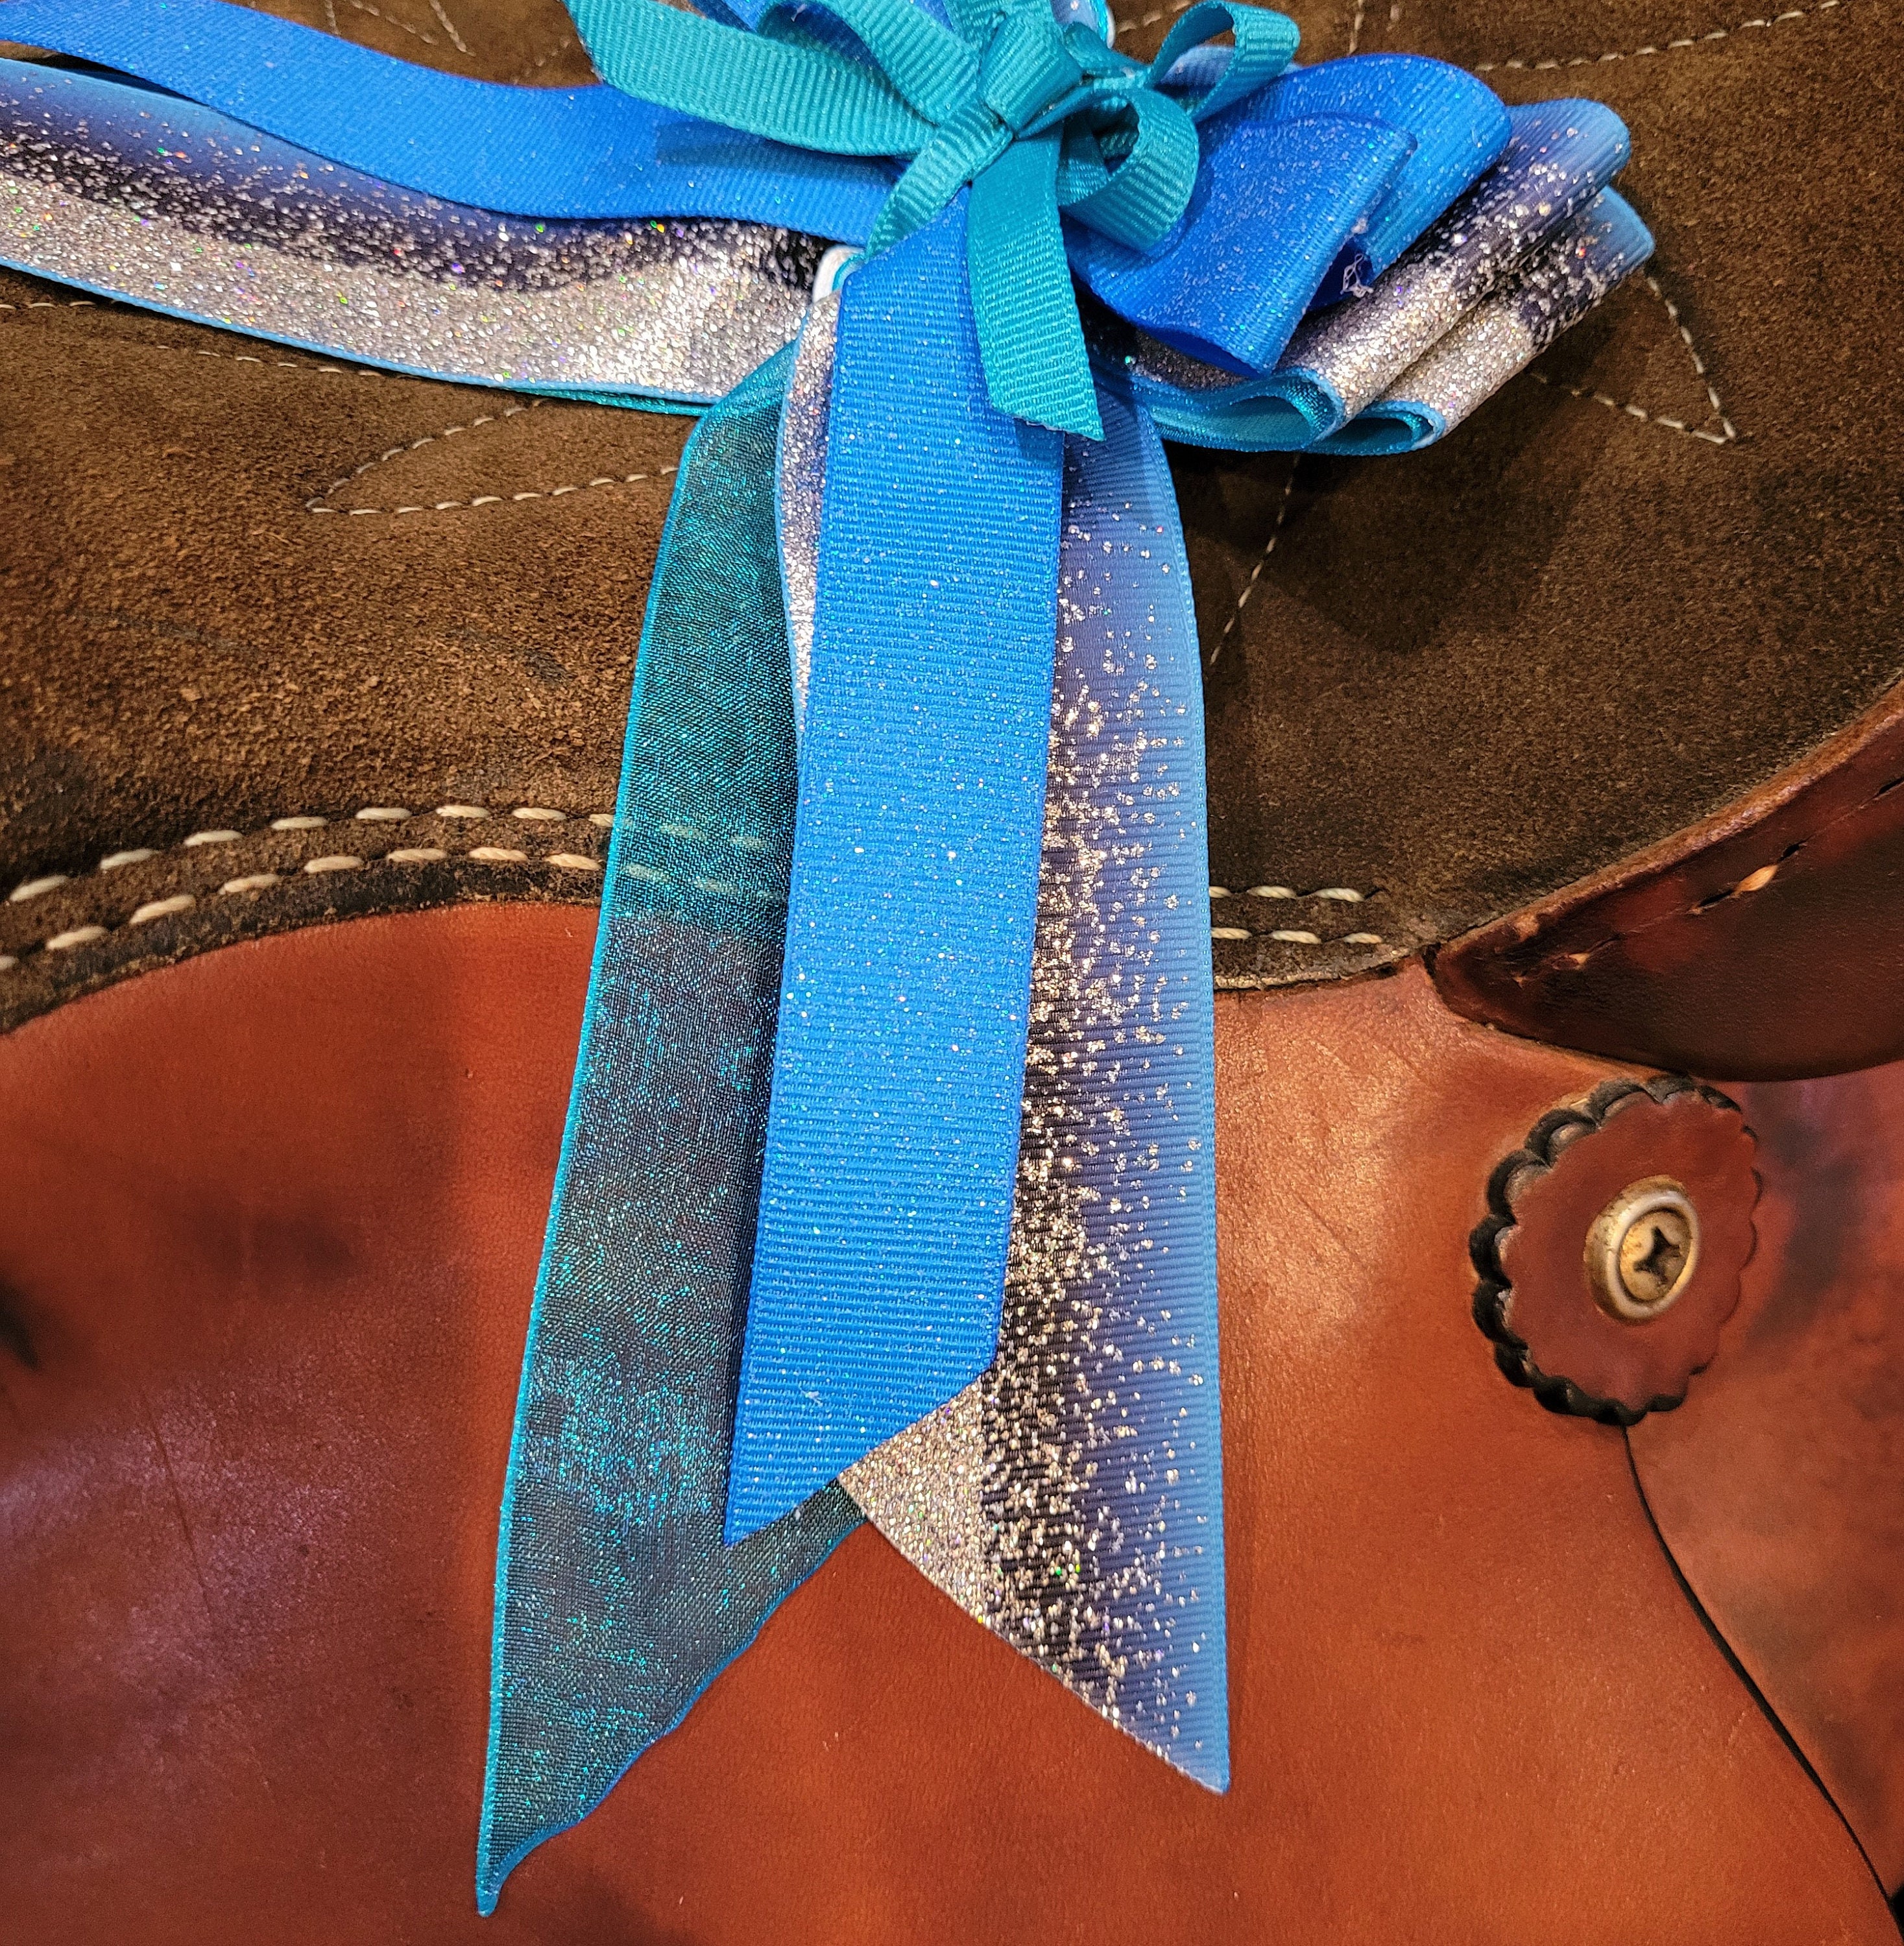 Navy & Red - Horse Show Hair Ribbons for Girls (Modern Snaffle-Bit Style)